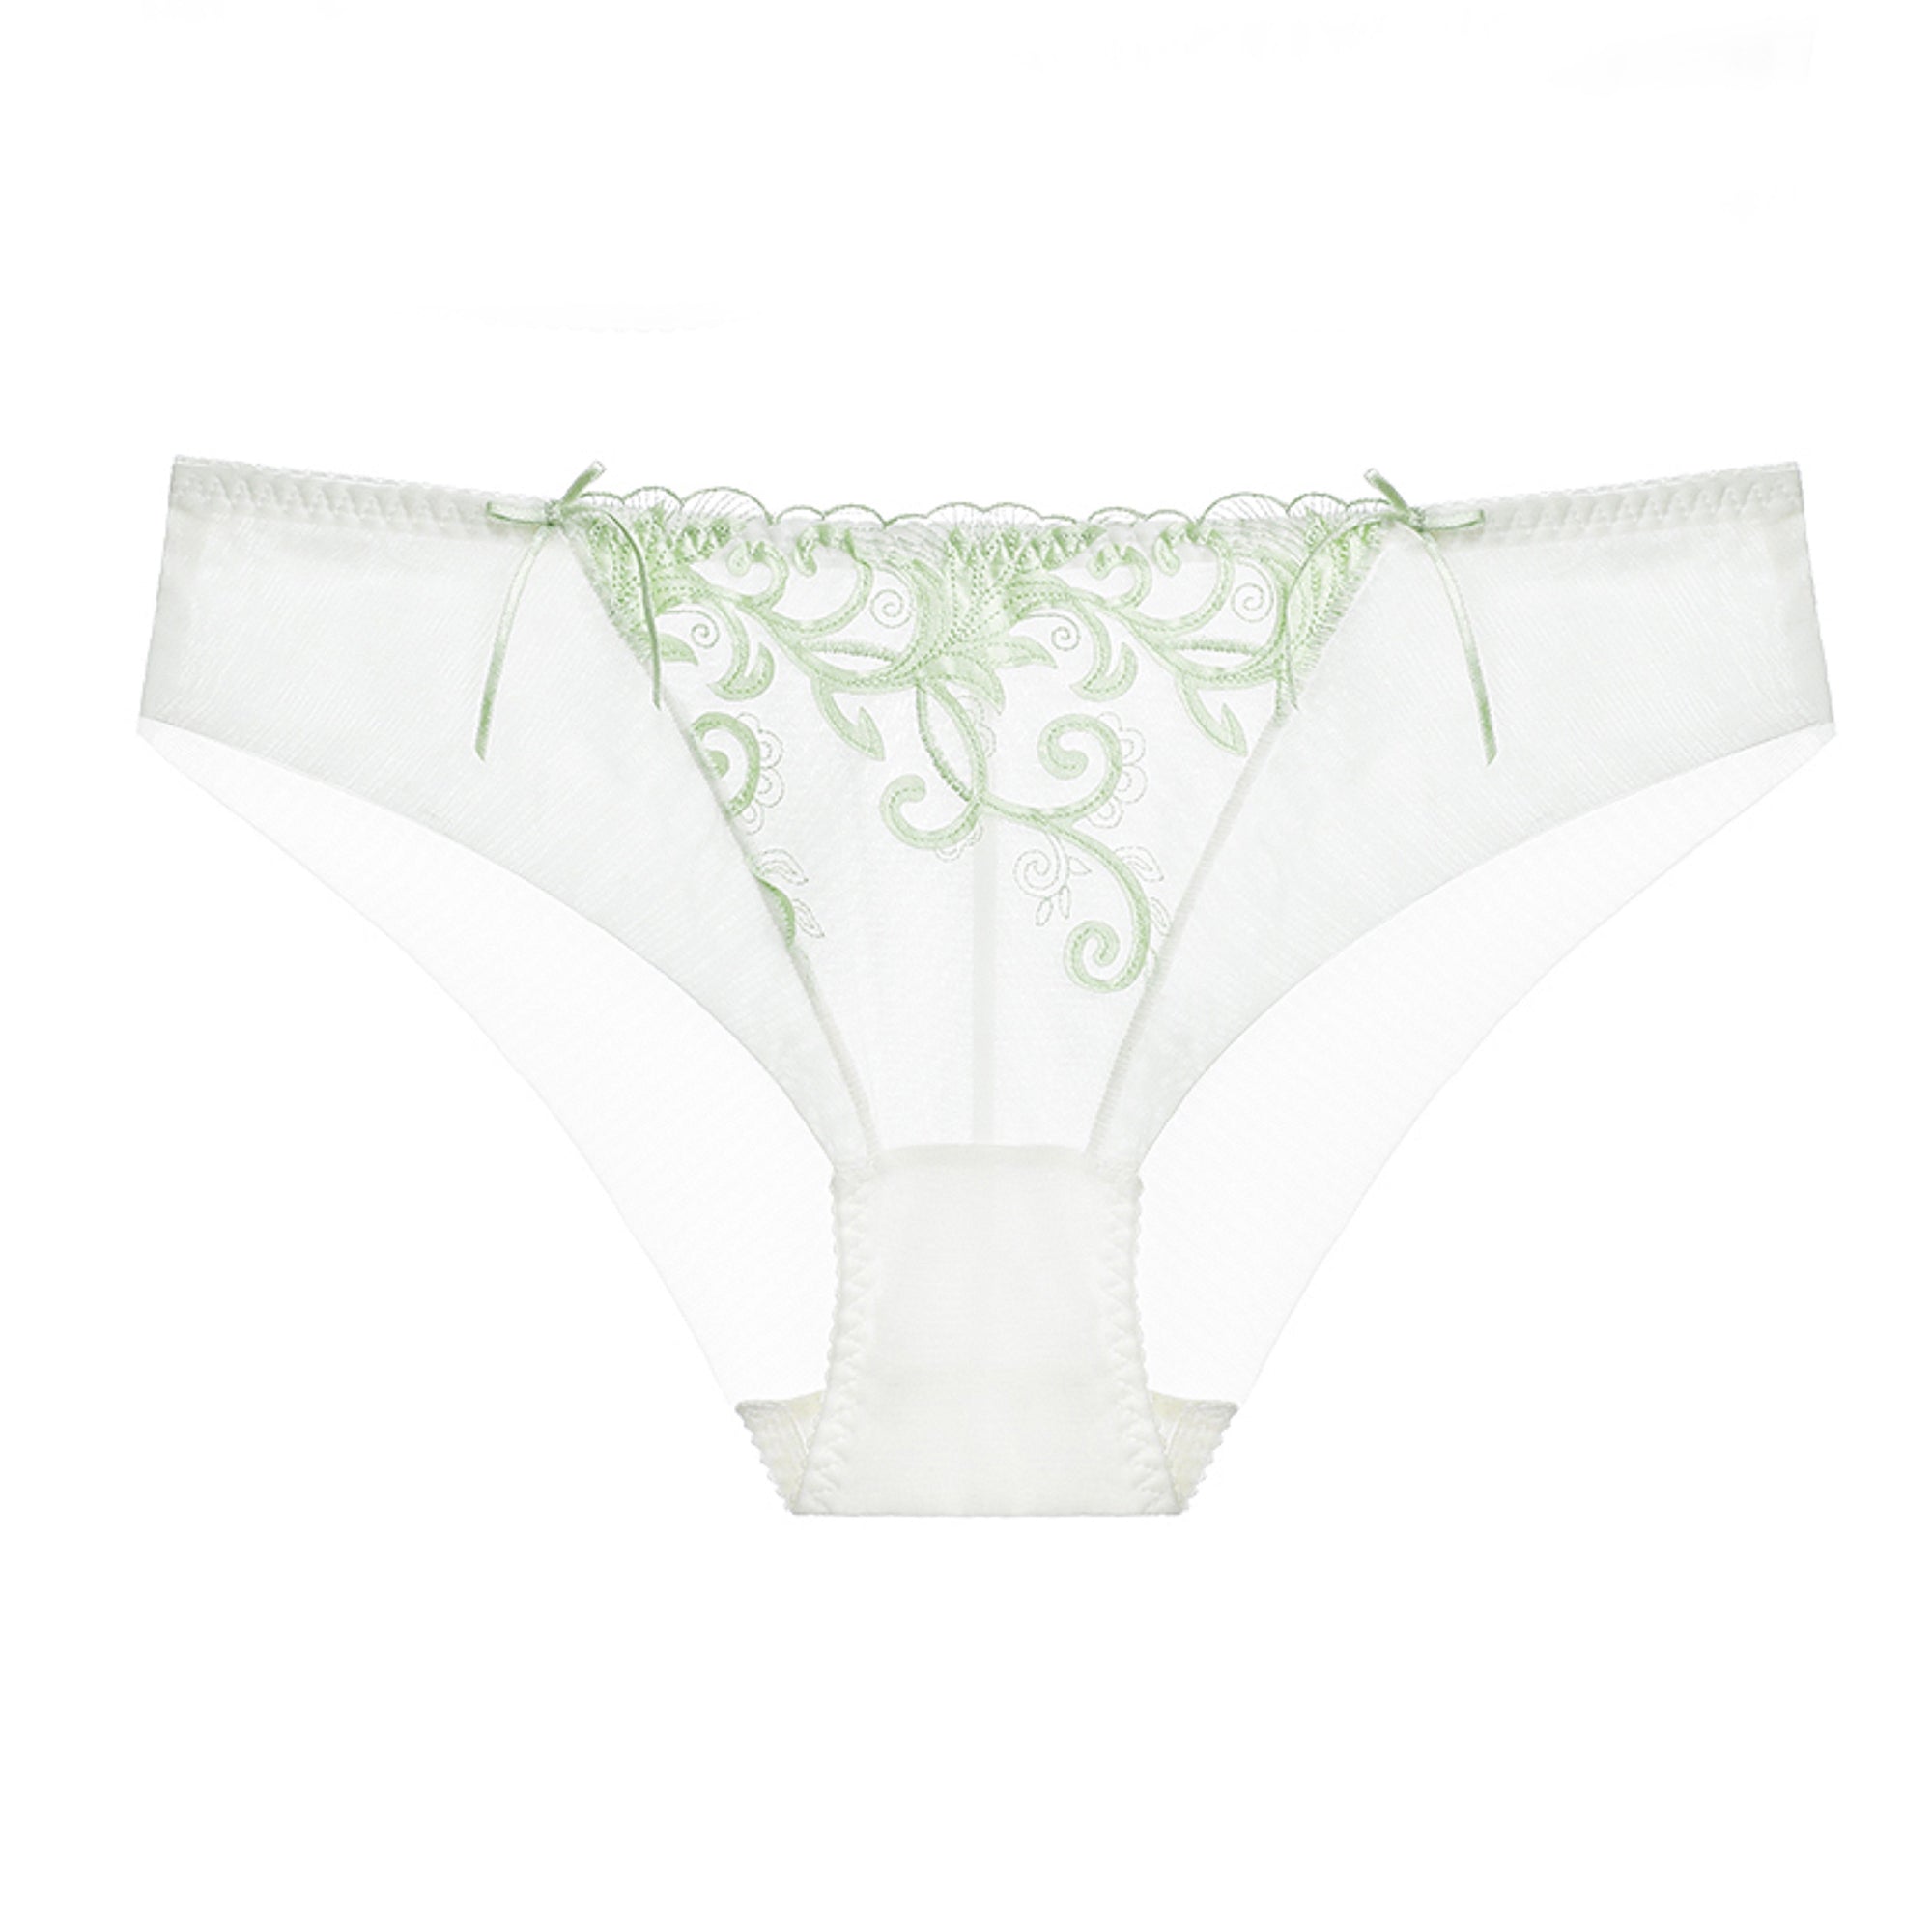 Sexy White Flower Embroidery Lingerie Panty Hello La Girl